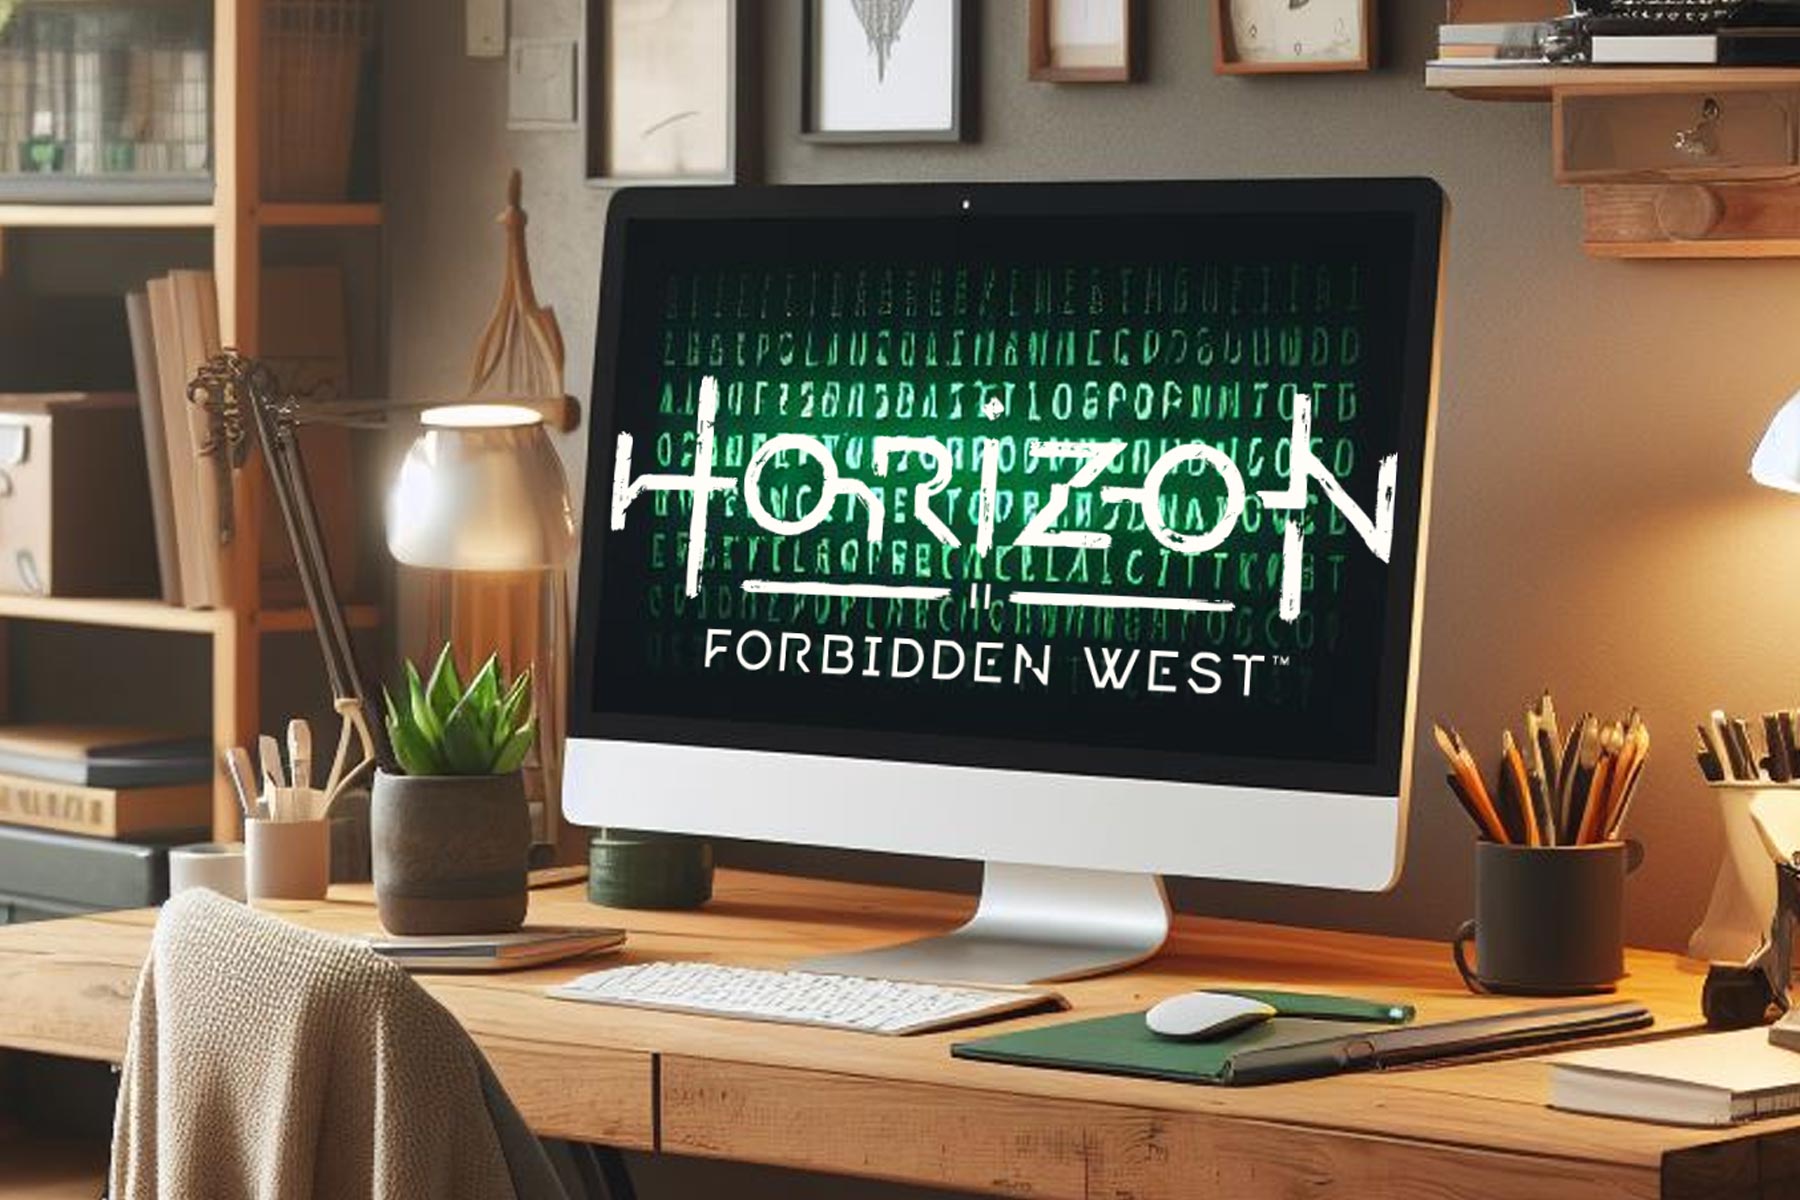 Disaster strikes as Horizon Forbidden West PC port gets cracked on day one